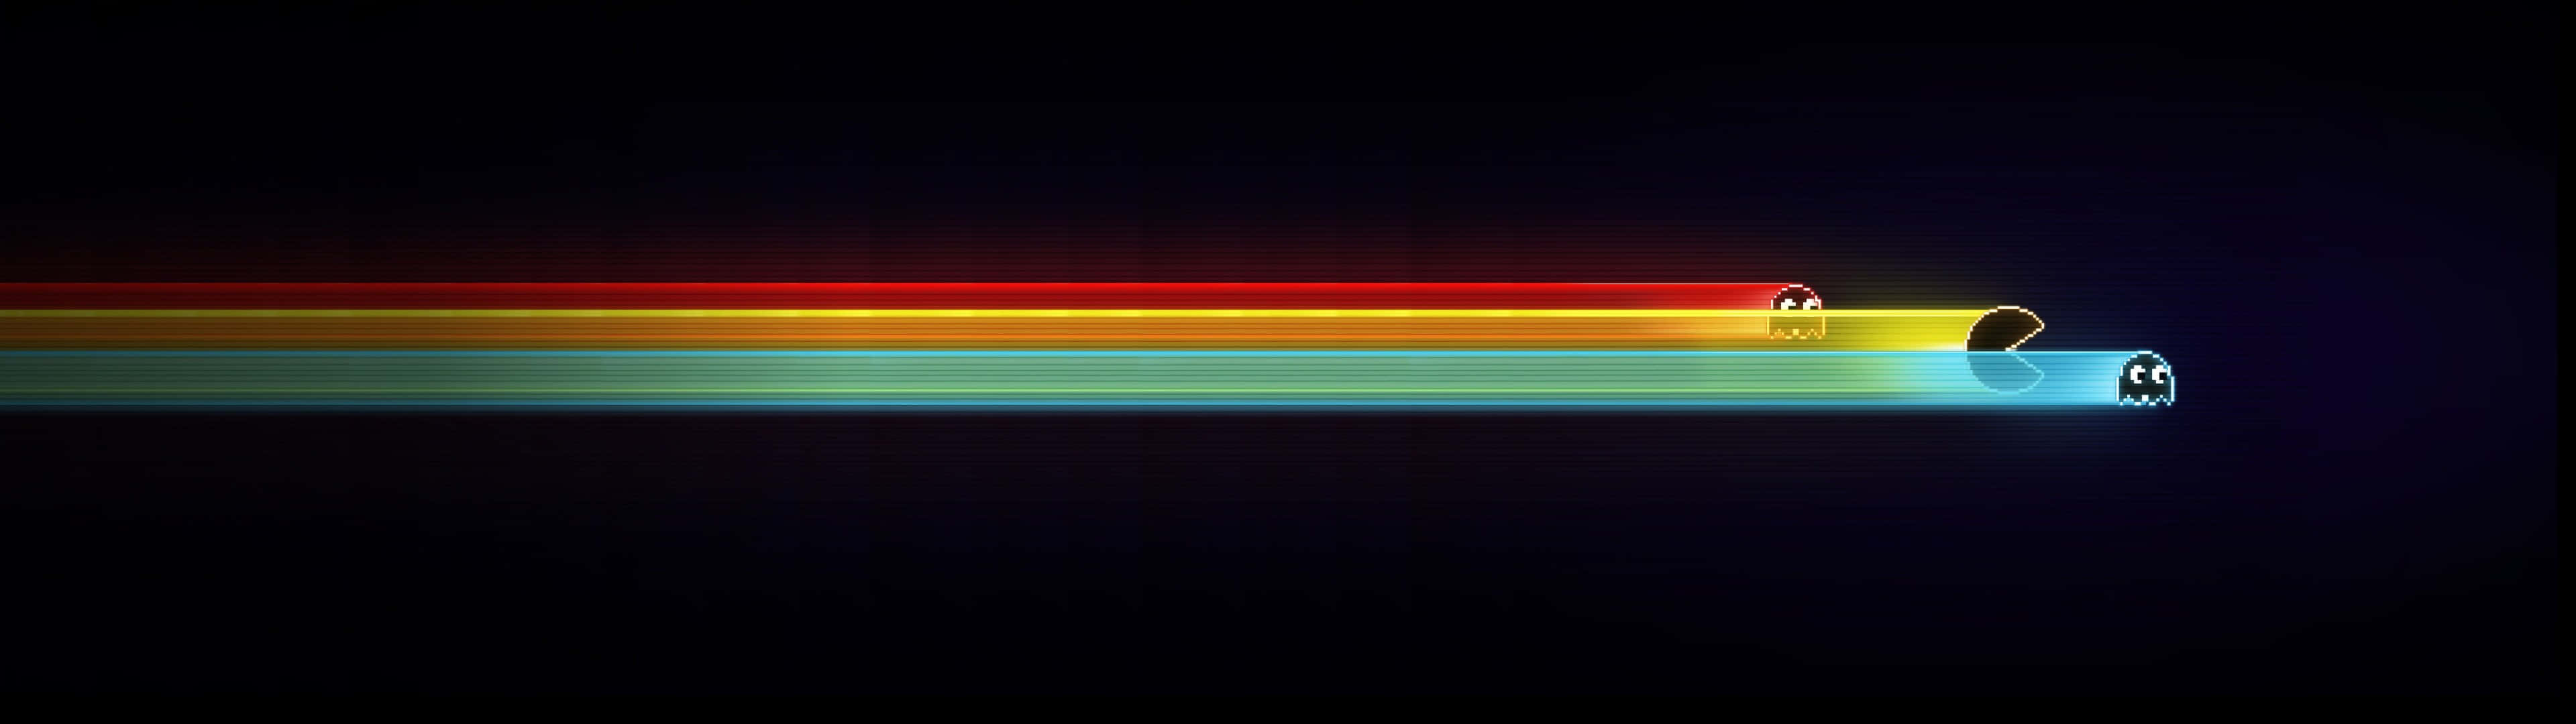 A Colorful Light Tube On A Black Background Wallpaper